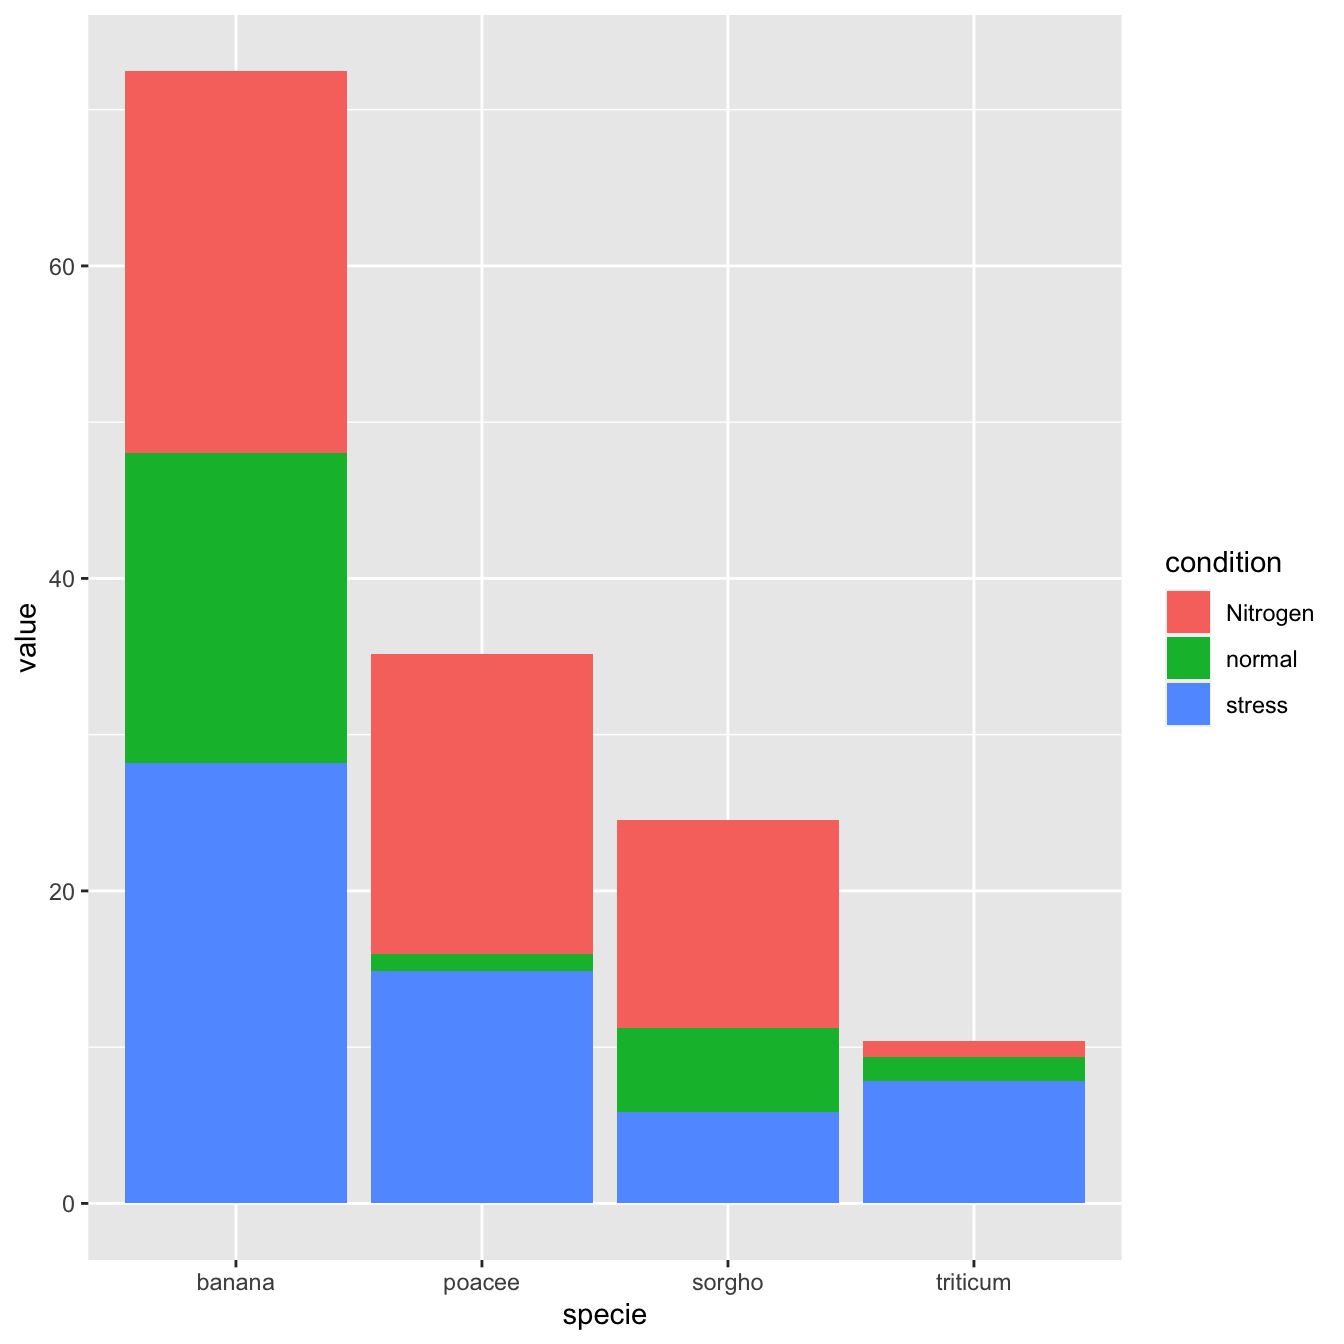 Stacked Bar Chart In Ggplot2